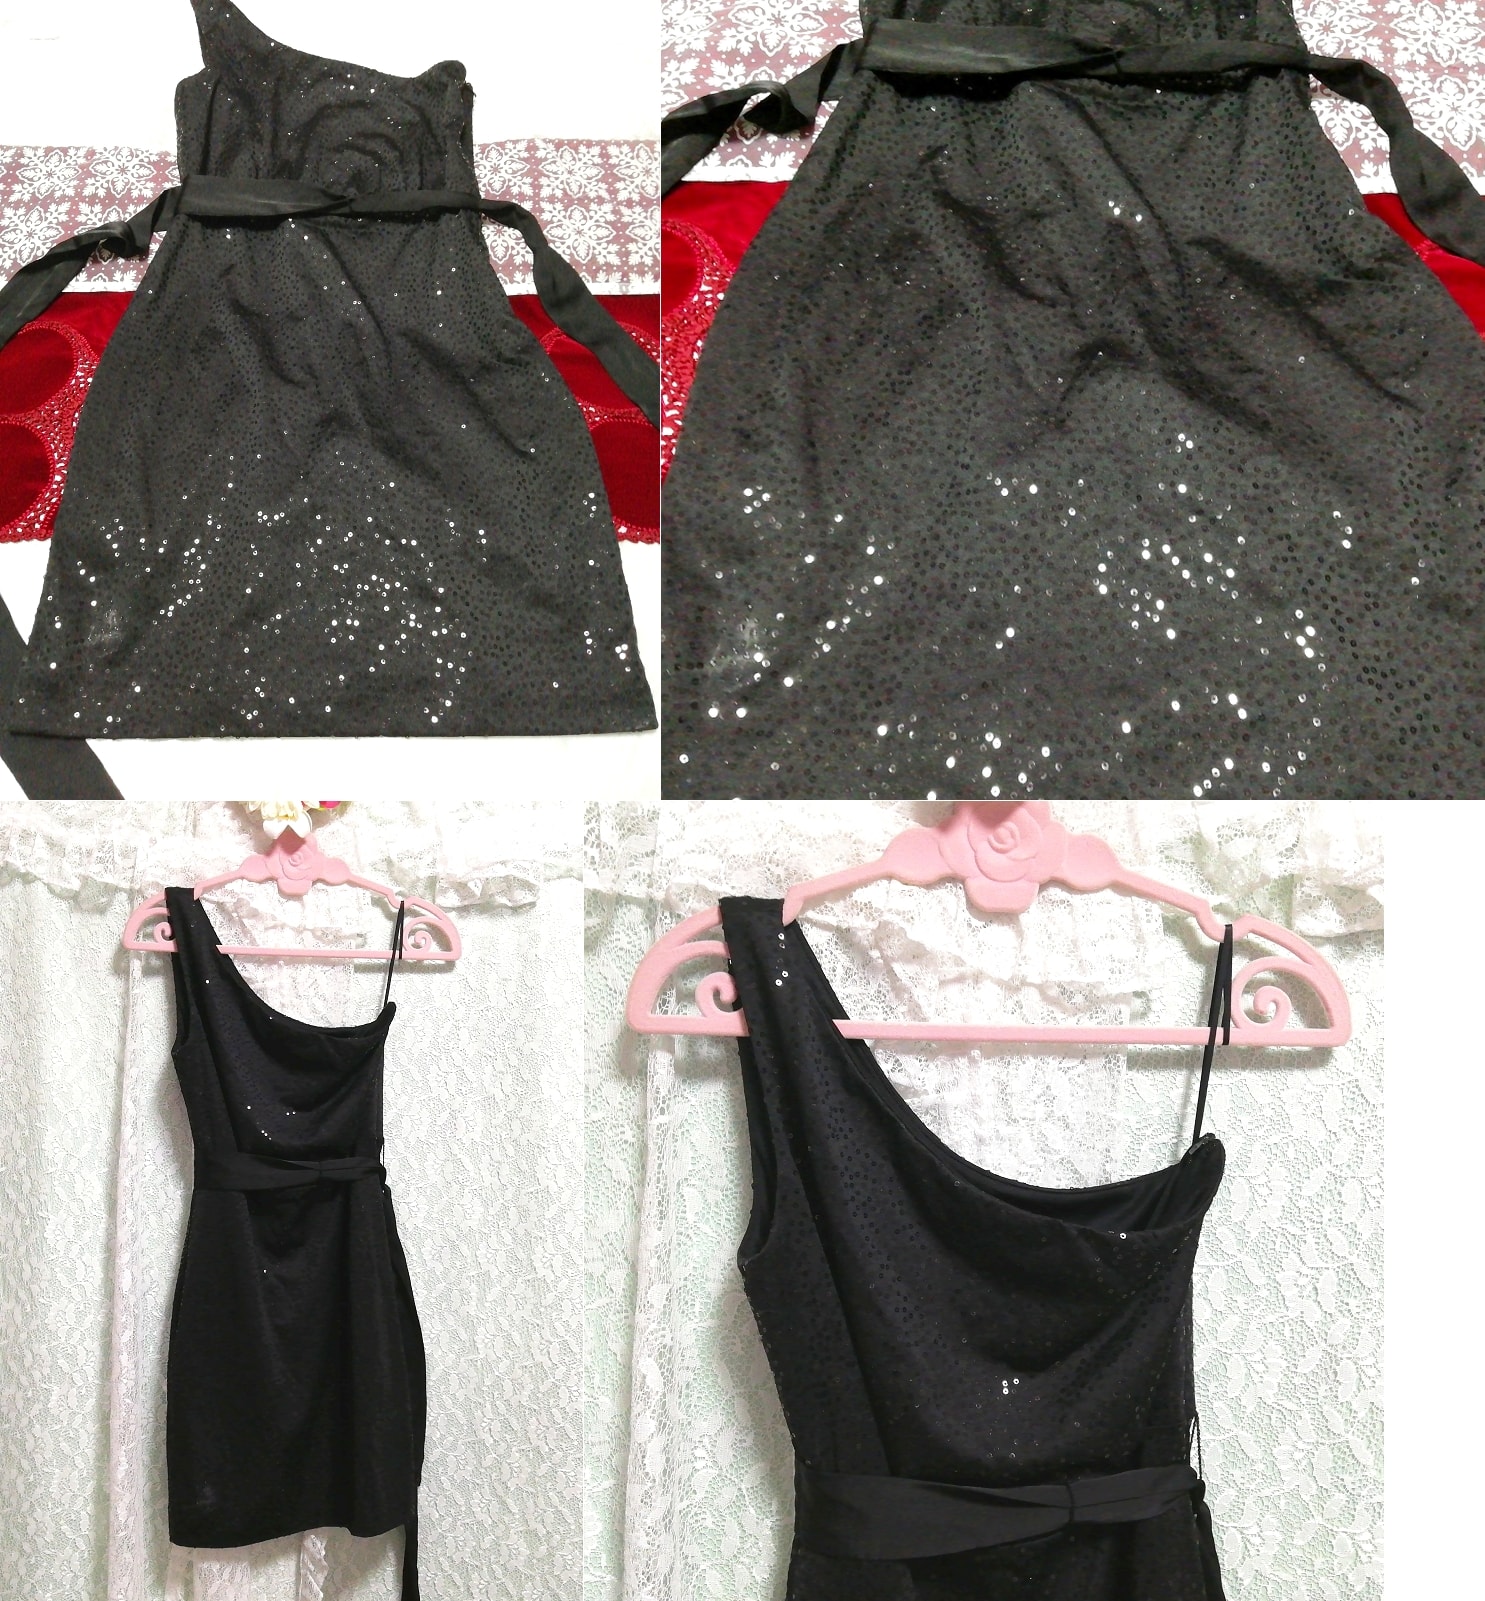 Black lame negligee nightgown sleeveless tight dress, knee length skirt, m size